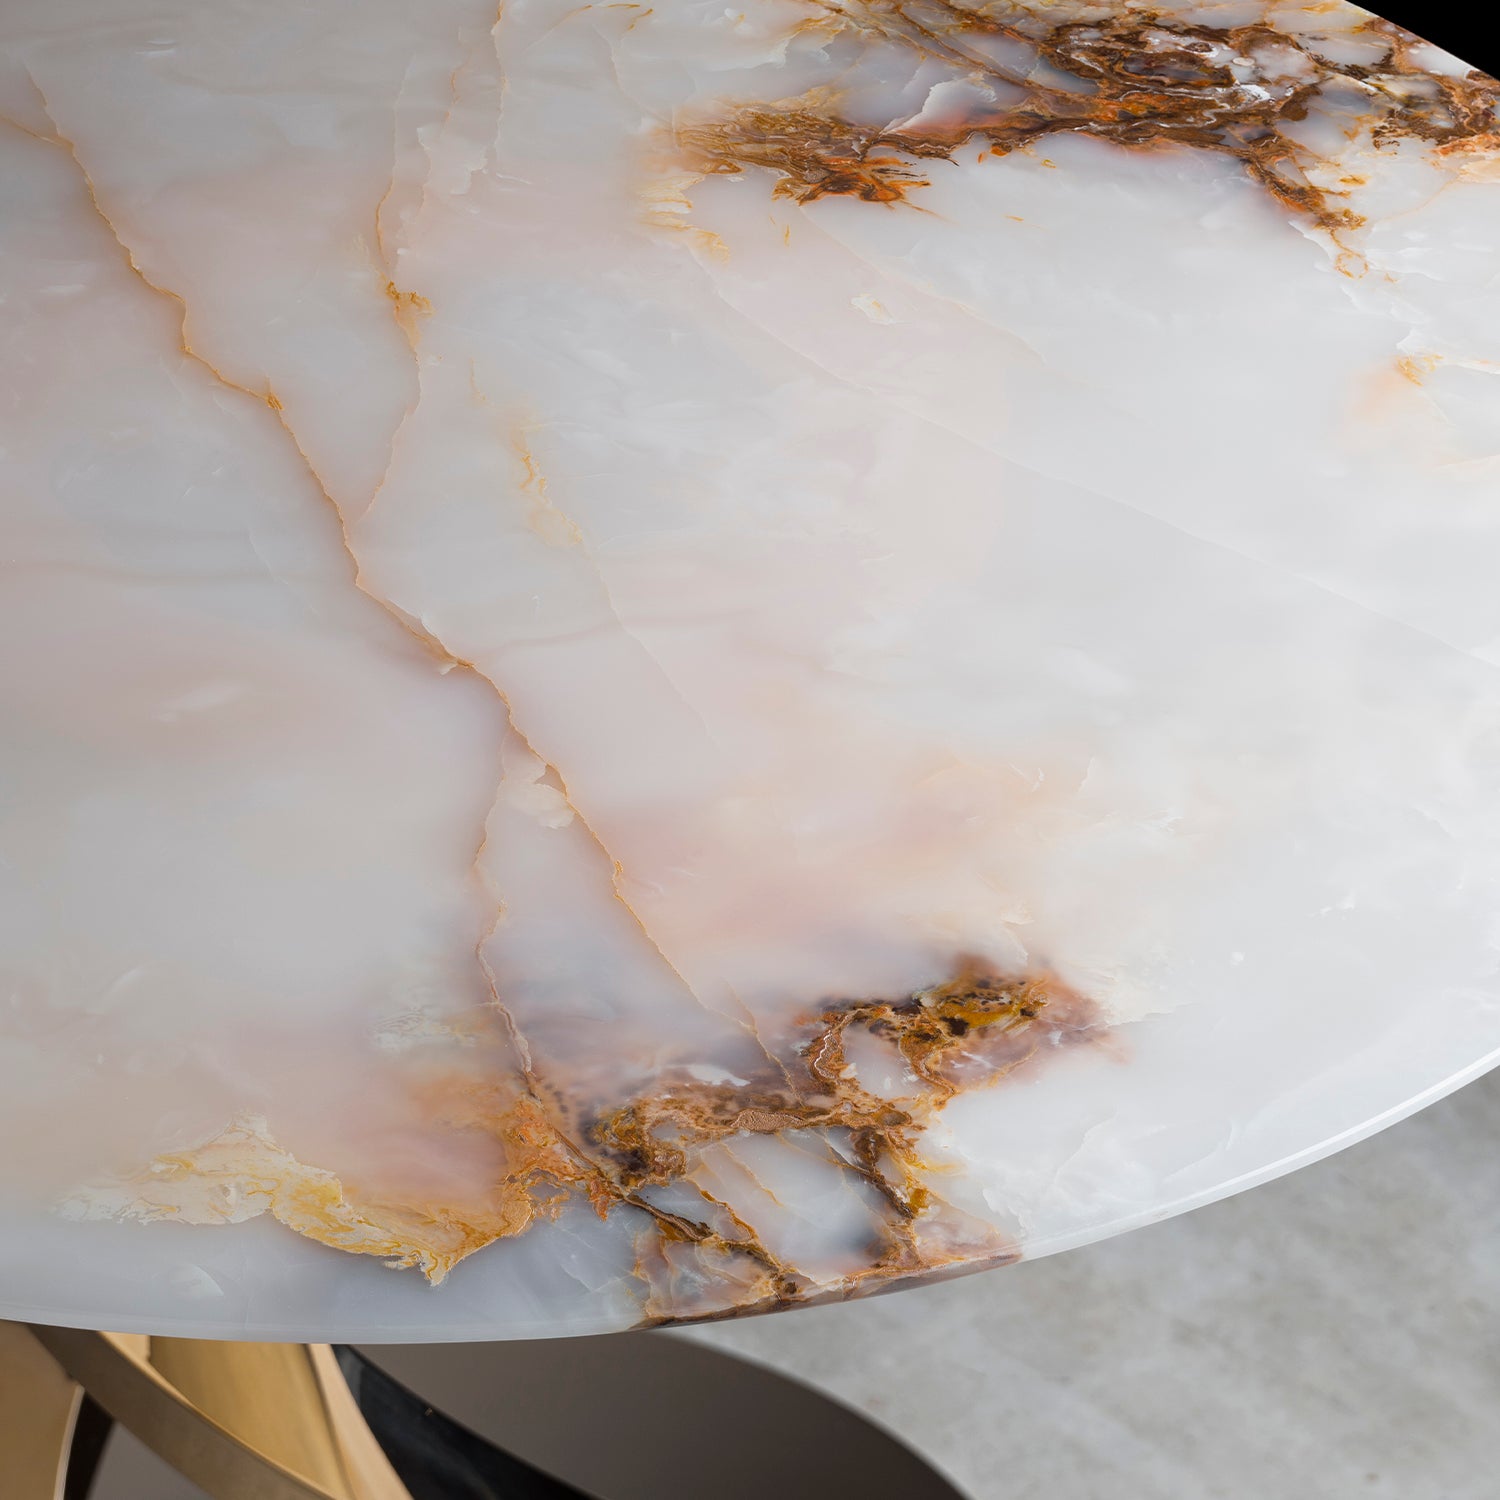 Eclypse Dining Table - Onyx & Gold